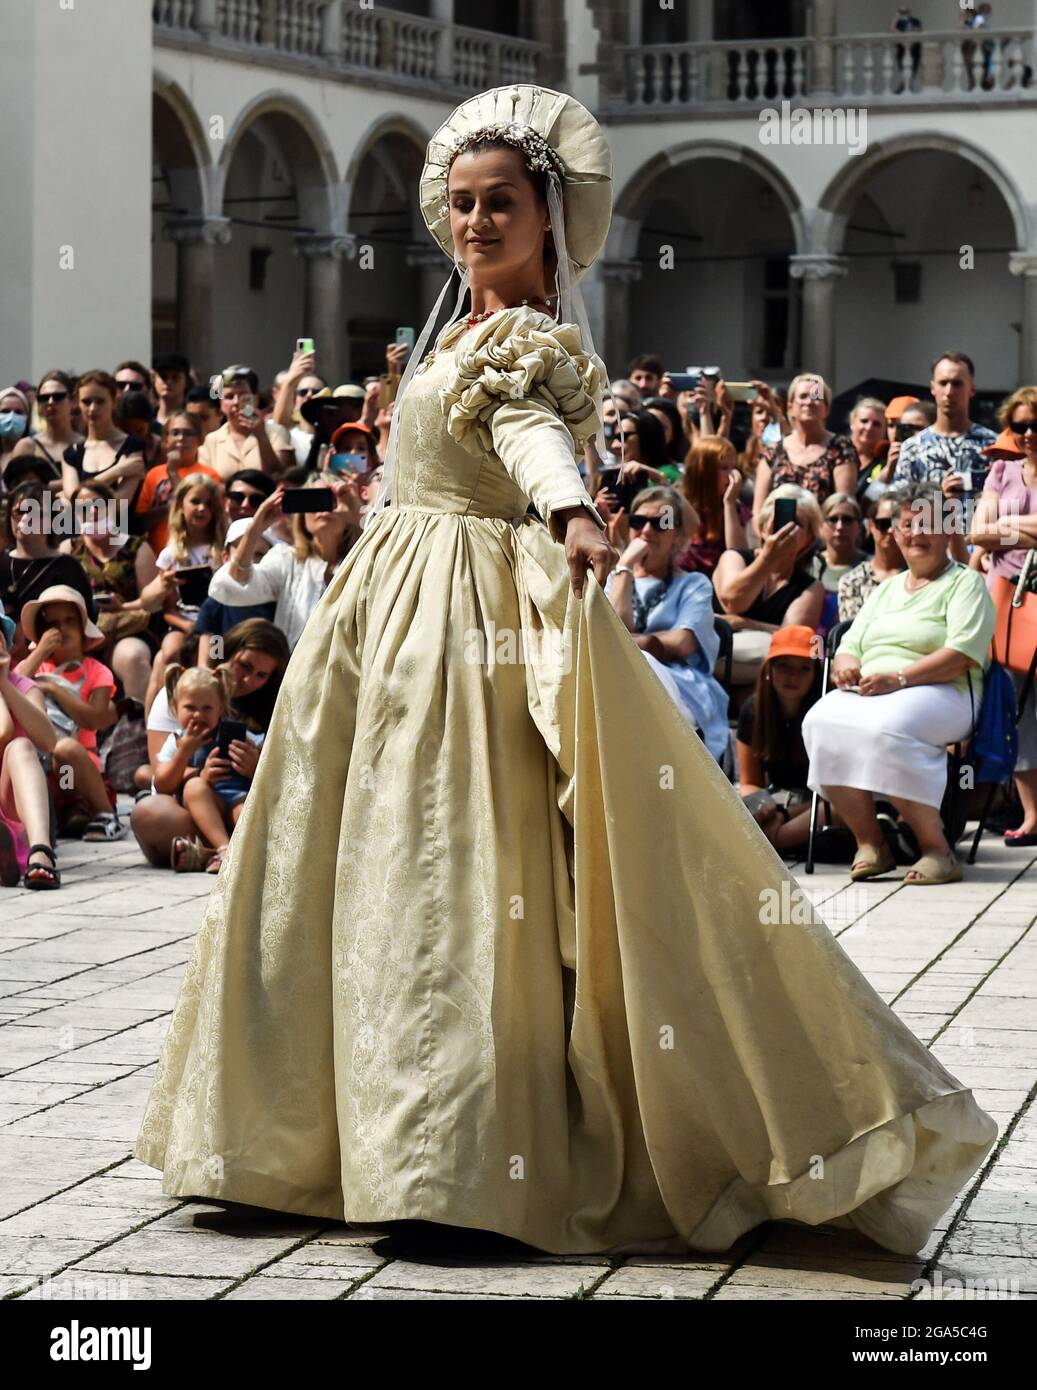 Krakow, Poland. 24th July, 2021. A performer dancing on stage during the fashion show.Dancers from the Terpsichore Dance Theatre and actors from Nomina Rosae Teatr presented a reconstruction of Renaissance fashion in the courtyard of the Wawel Royal Castle in Krakow. (Credit Image: © Alex Bona/SOPA Images via ZUMA Press Wire) Stock Photo